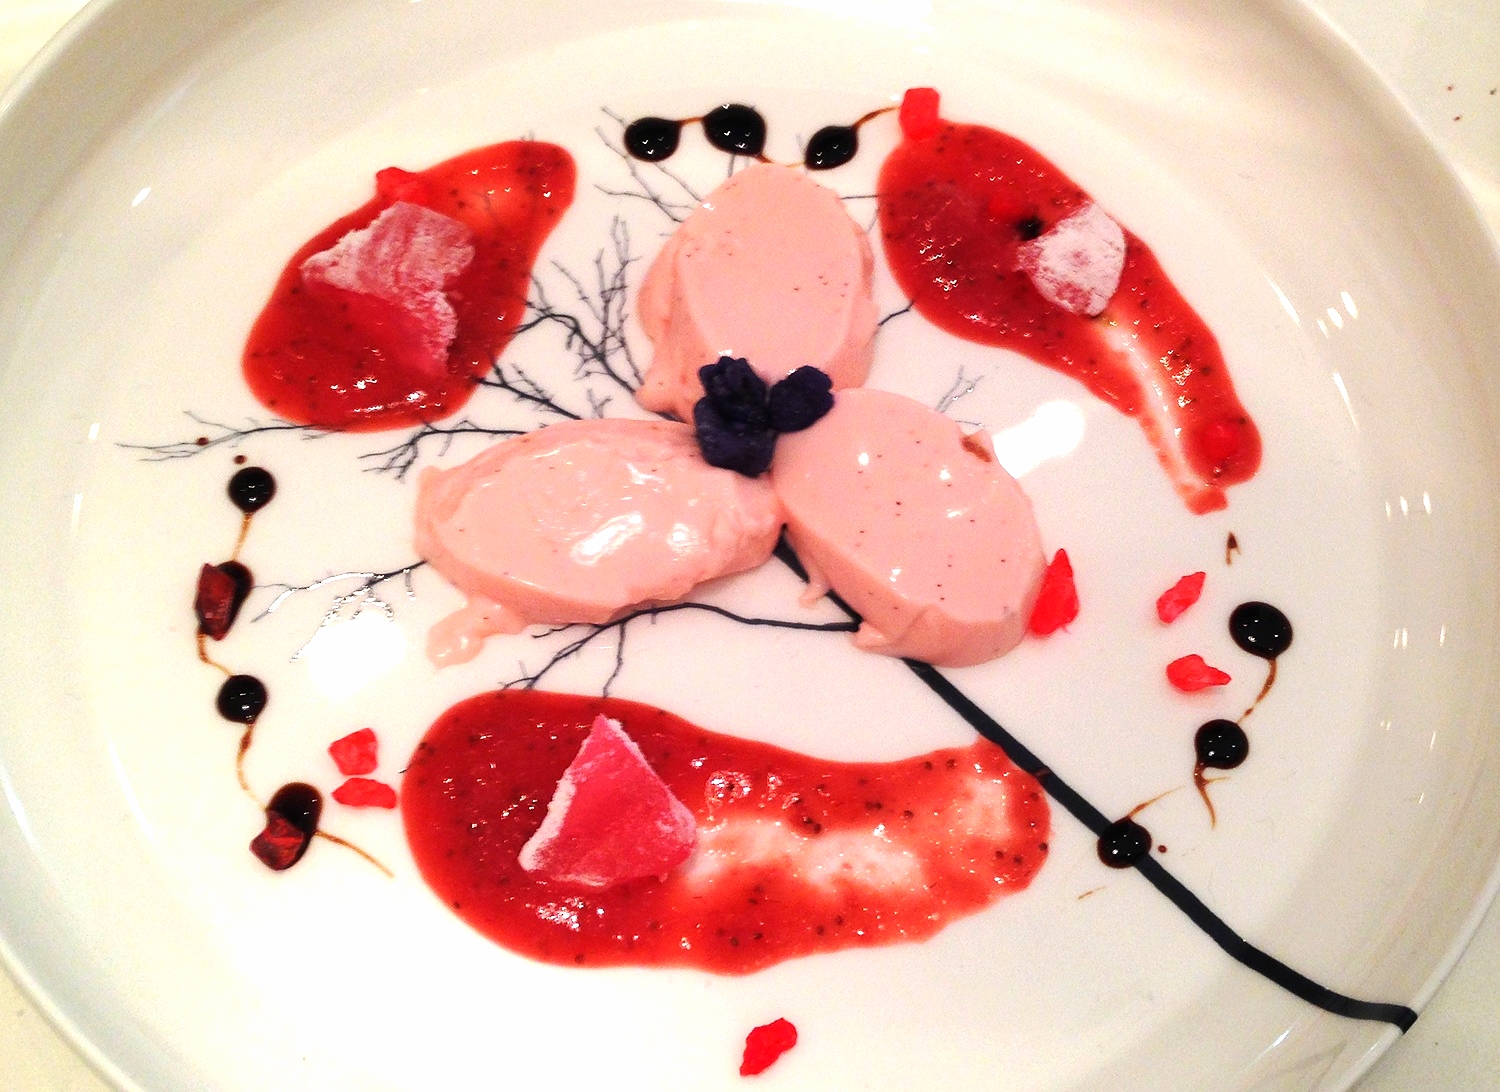 Rosewater panna cotta, strawberry sauce, turkish delight, candied violets and balsamic swirls